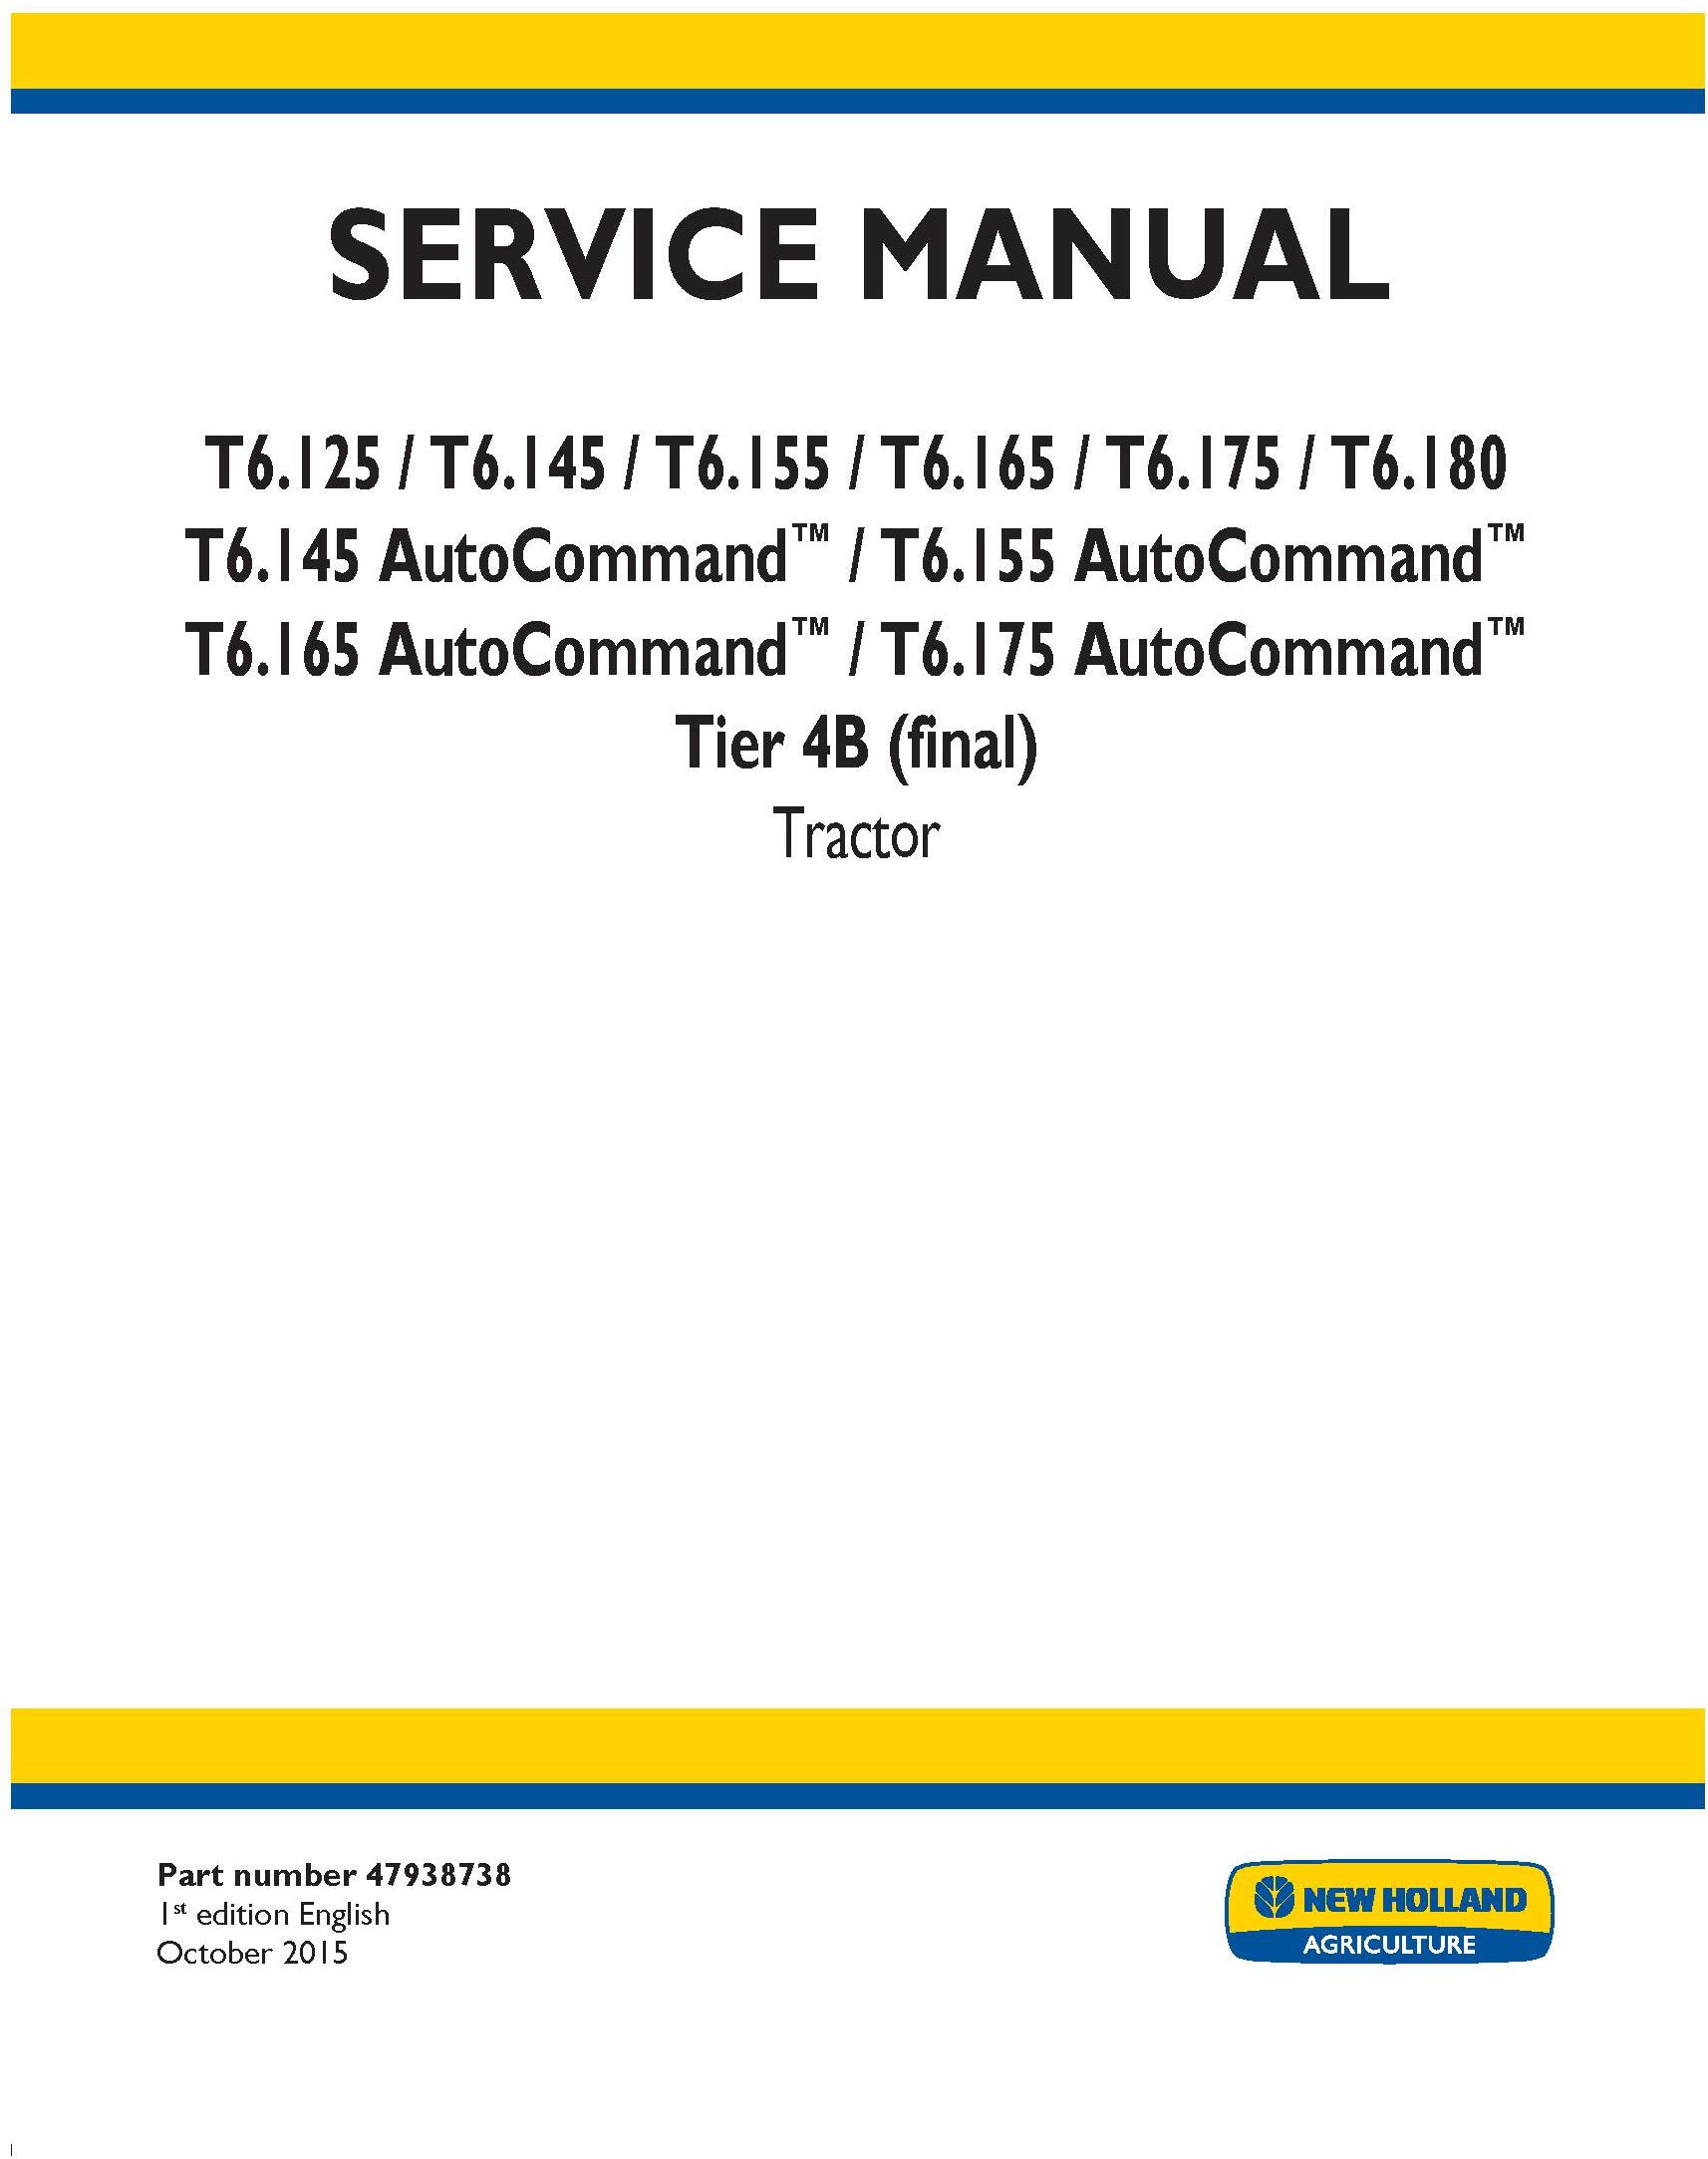 New Holland T6.125, T6.145, T6.155, T6.165, T6.175, T6.180 Auto Command Tractor Service Manual (USA)